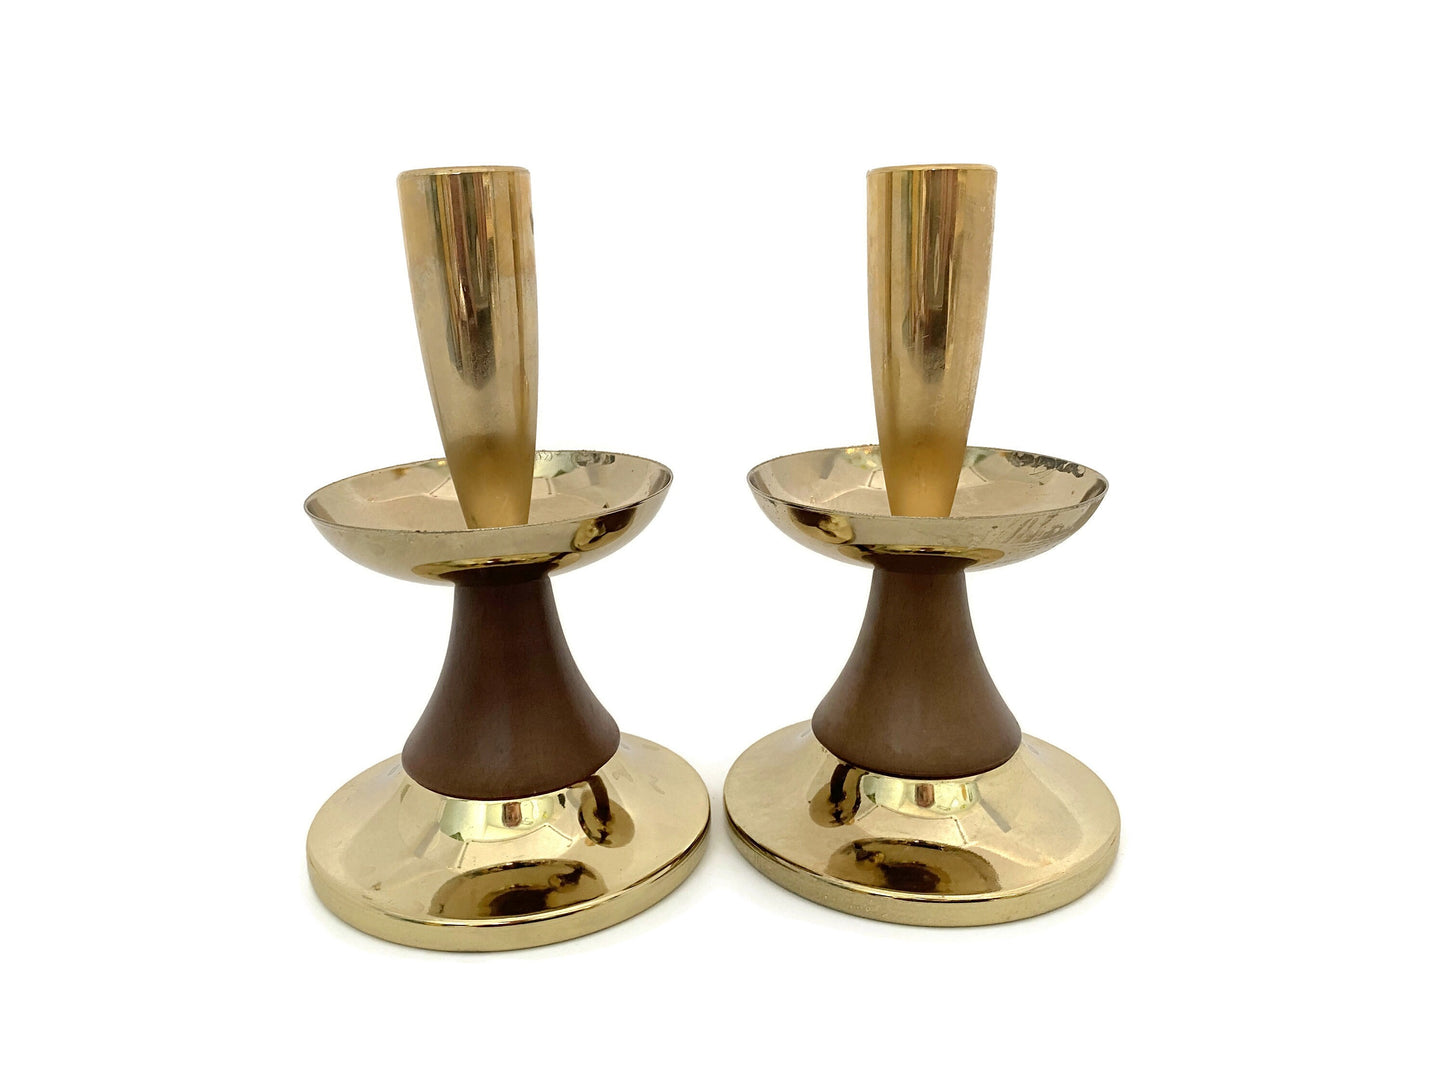 Midcentury Butane Candles and Candleholders by Hellerware